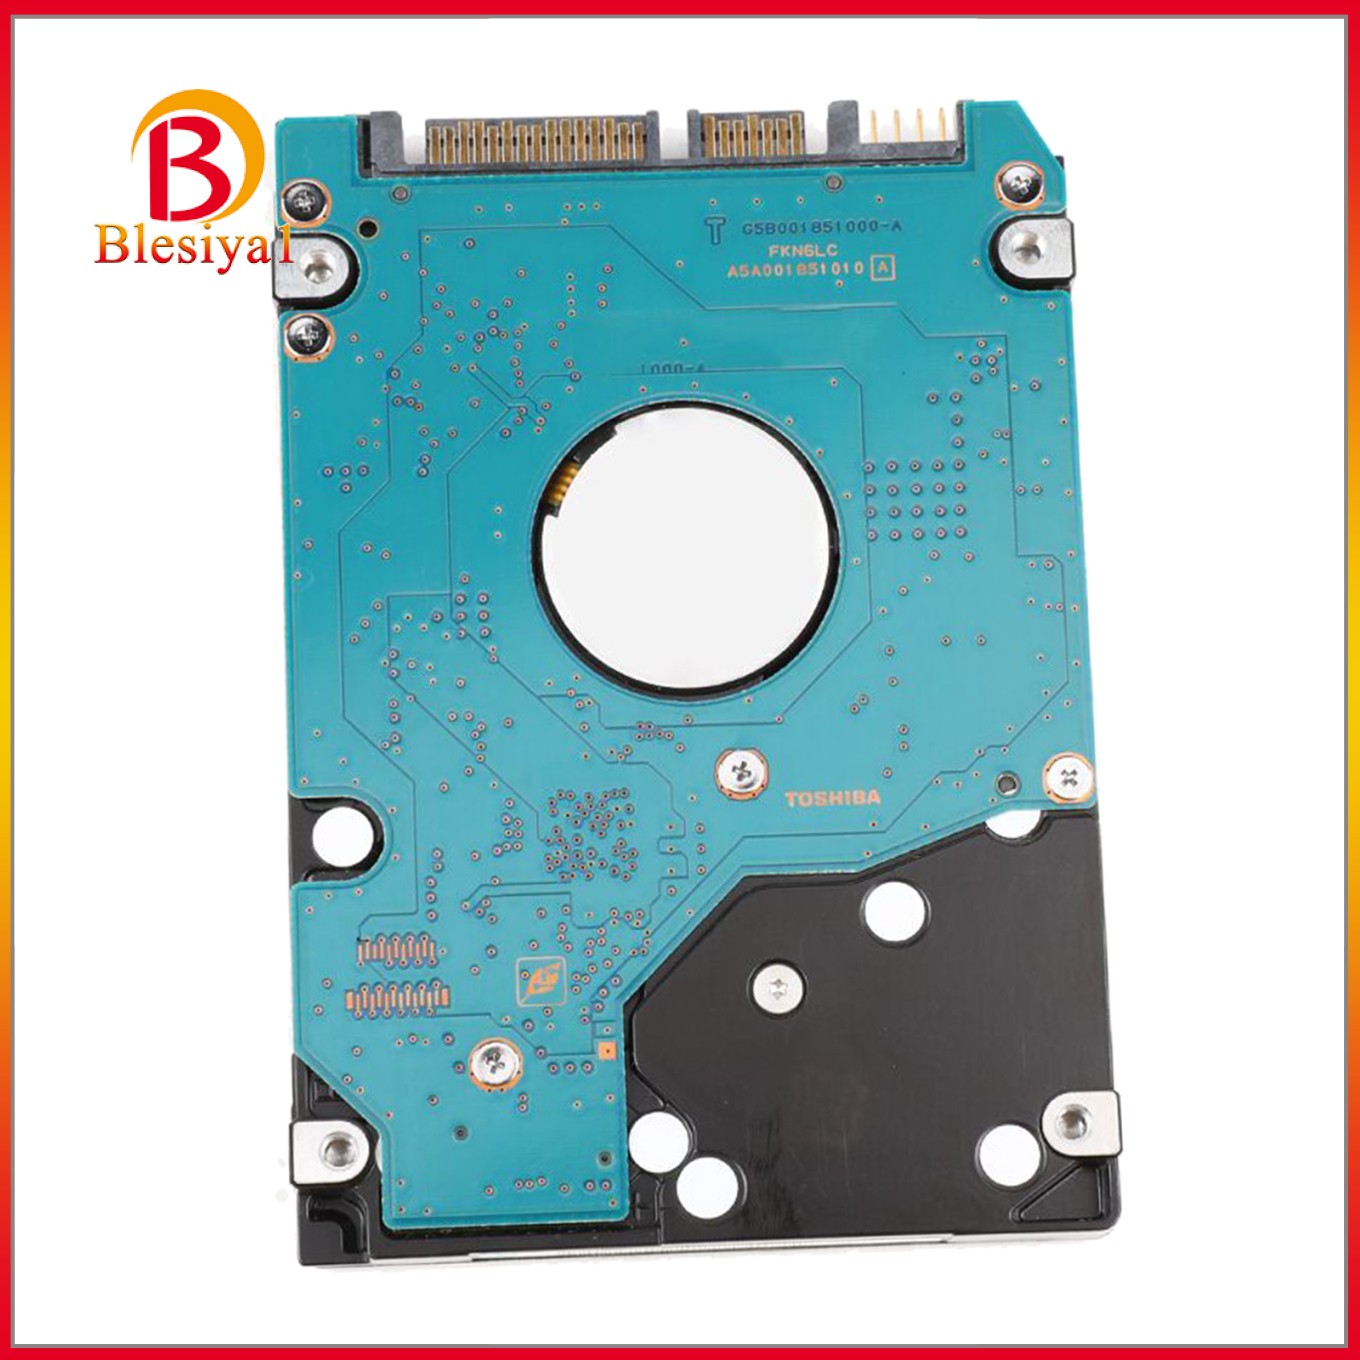 Ổ Cứng Hdd Trong Suốt 5400rpm Sata 120g 2.5 "